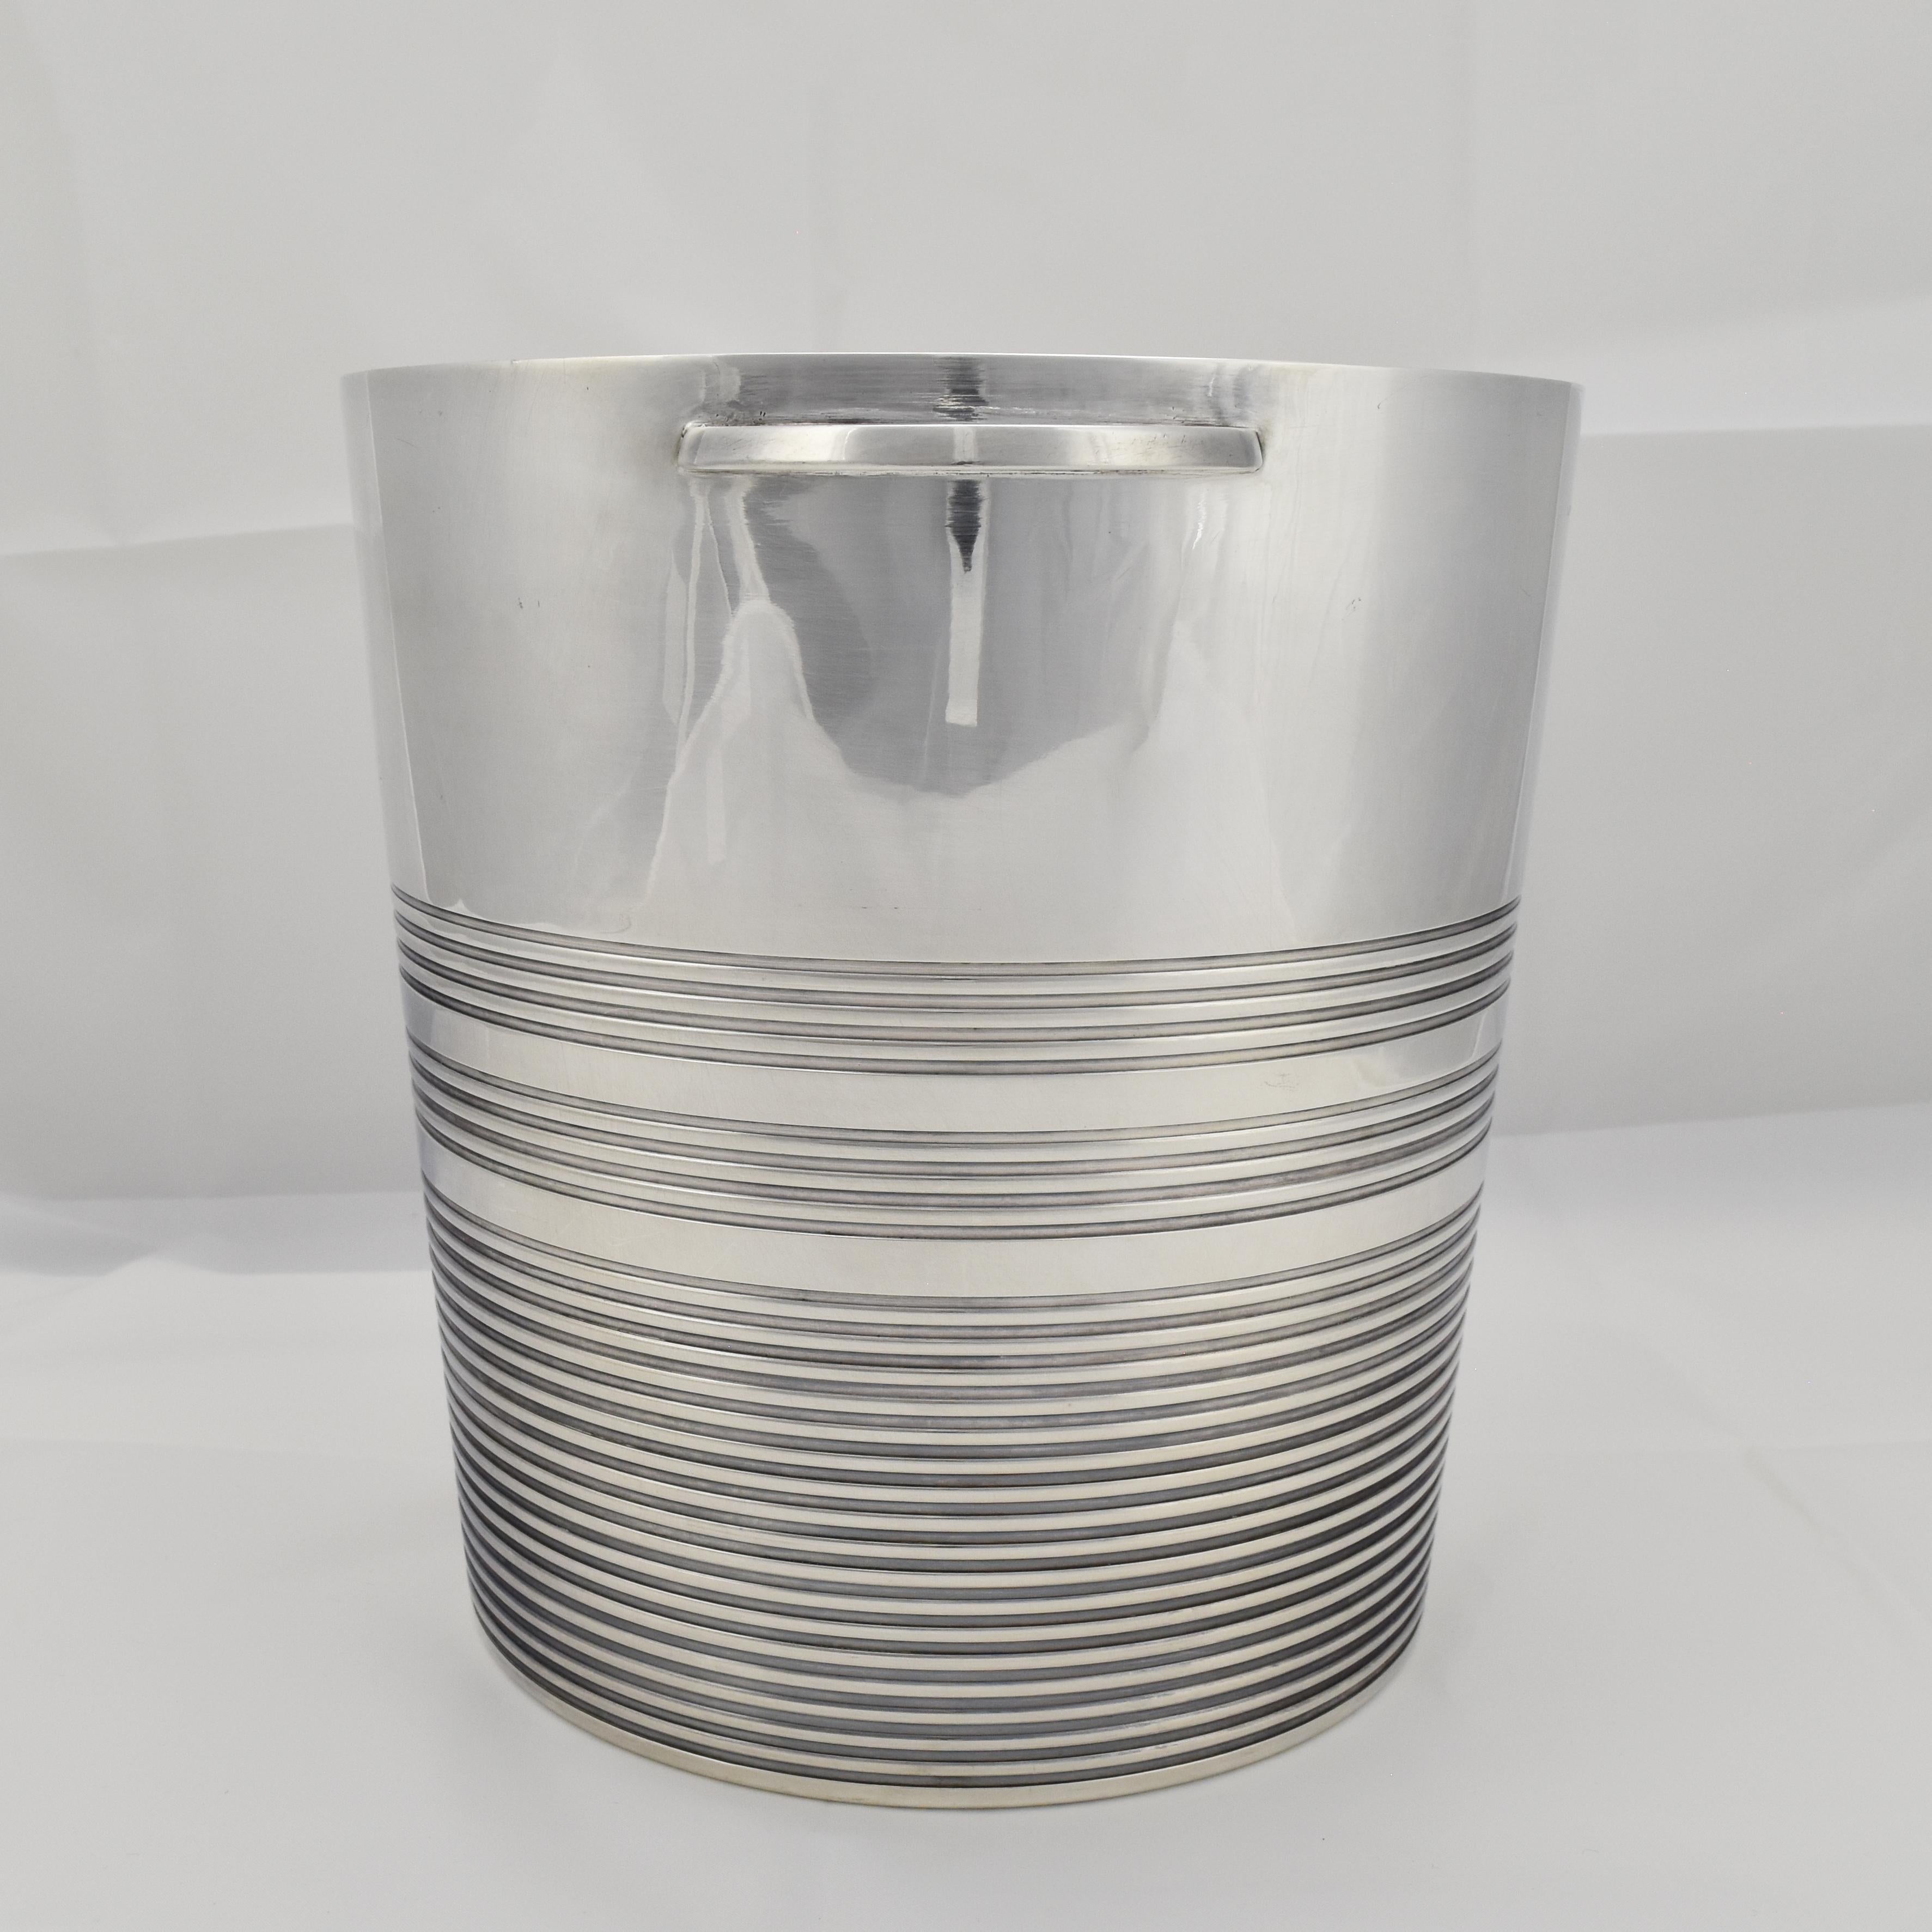 French Art Deco Champagne Ice Bucket / Wine Cooler by Orfèvrerie Ercuis Paris For Sale 7